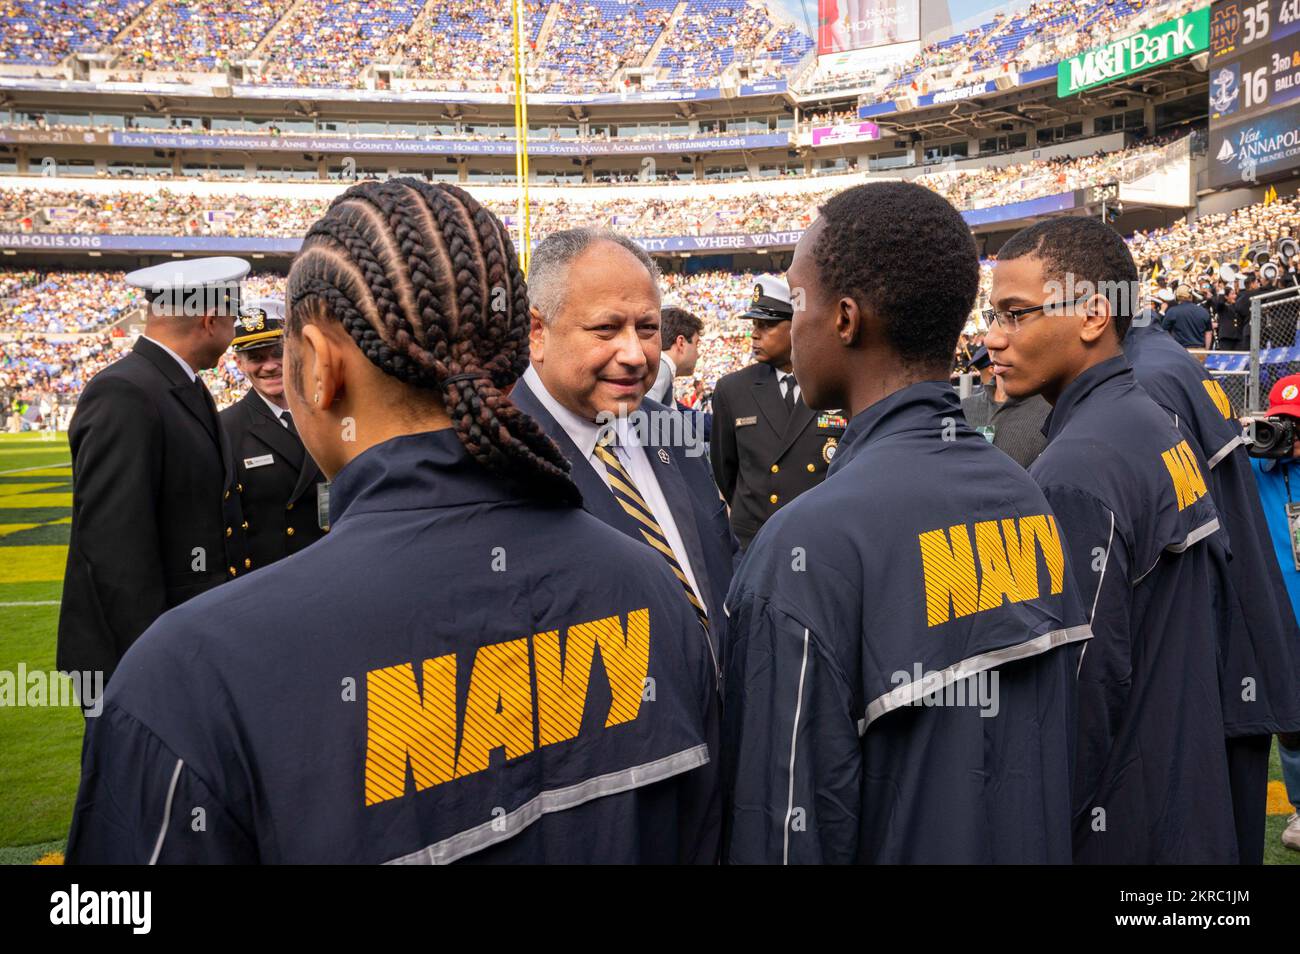 221112-N-WF272-2483 BALTIMORE (Nov. 12, 2022) U.S. Secretary of the Navy Carlos Del Toro meets future U.S. Navy Sailors, recruited by Navy Talent Acquisition Group Philadelphia, during the Navy-Notre Dame football game held at M&T Bank Stadium in Baltimore, Nov. 12, 2022. The game marked the 23rd time the city of Baltimore has hosted a Navy-Notre Dame game and the first since 2008. NTAG Philadelphia encompasses regions of Pennsylvania, New Jersey, Delaware, Maryland and West Virginia, providing recruiting services from more than 30 talent acquisition sites with the overall goal of attracting t Stock Photo